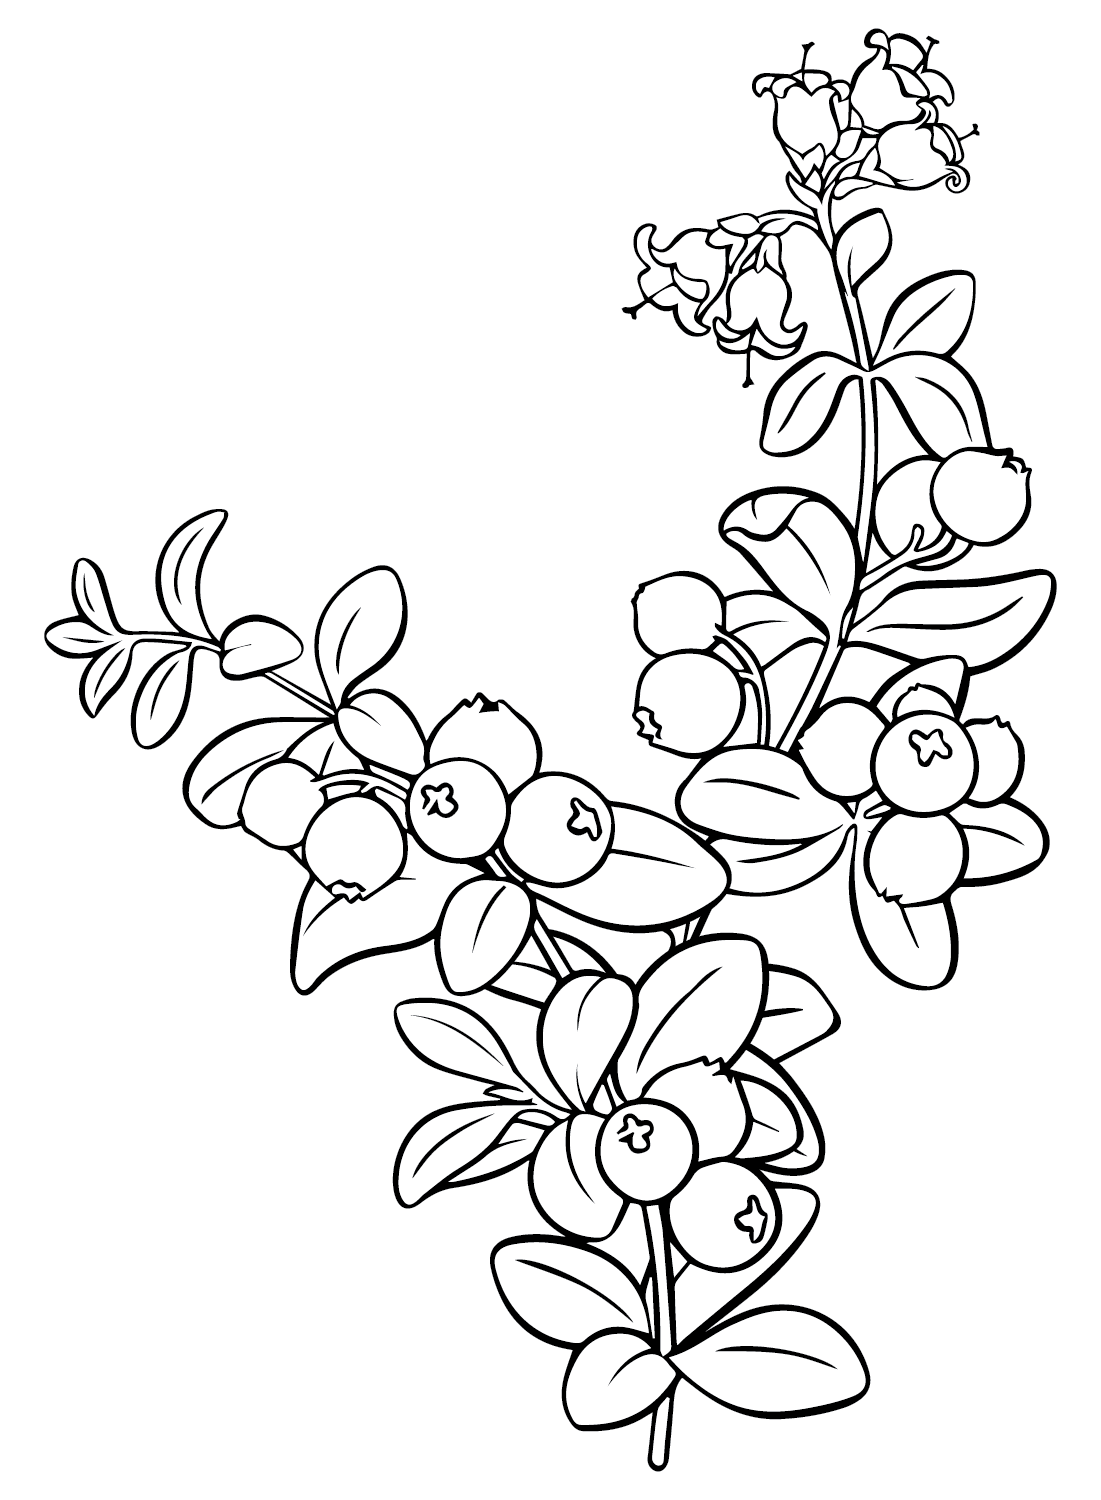 Branch Cranberry Coloring Page